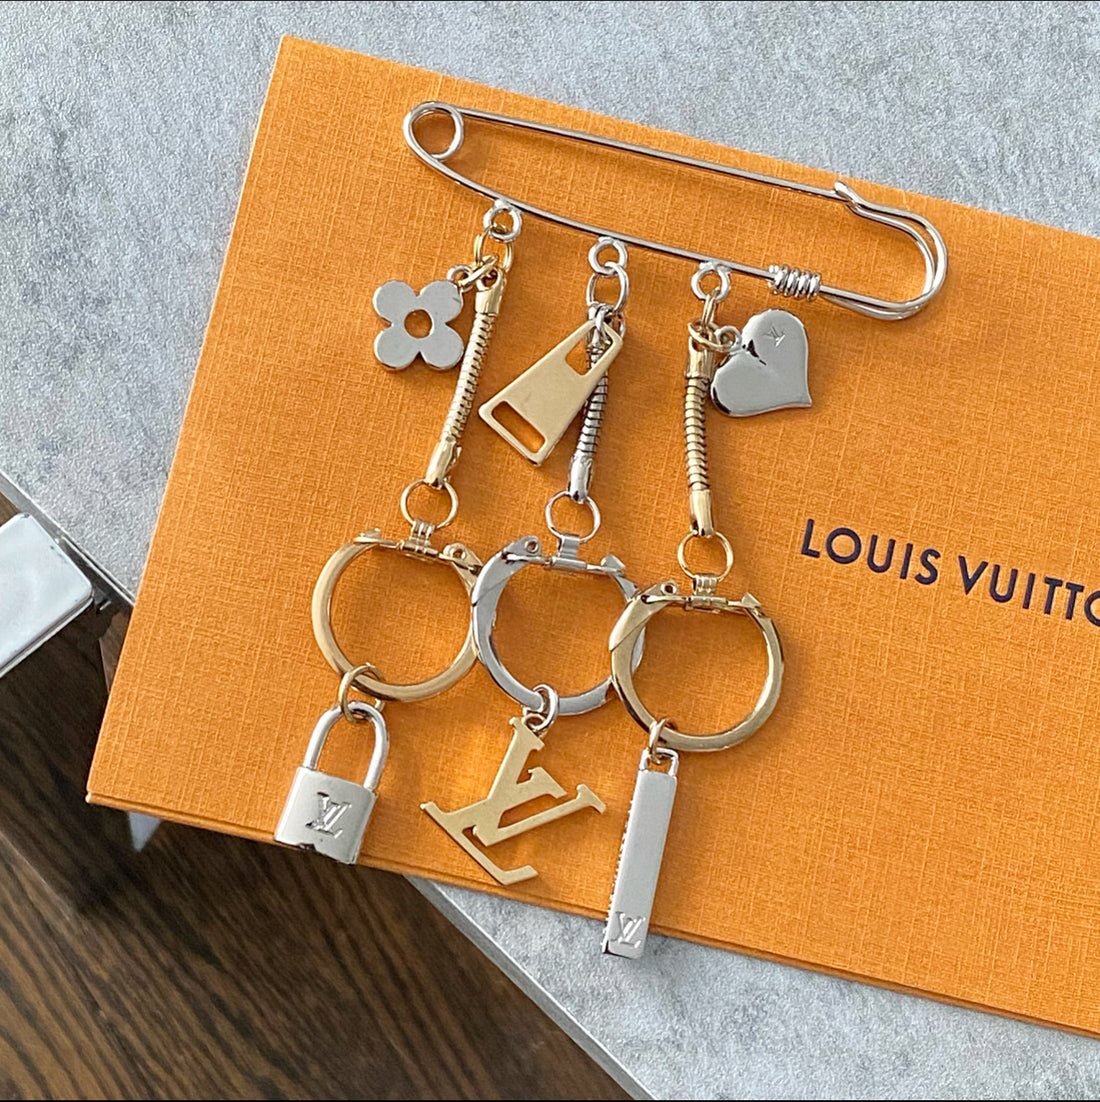 Pin on Other LV Bags